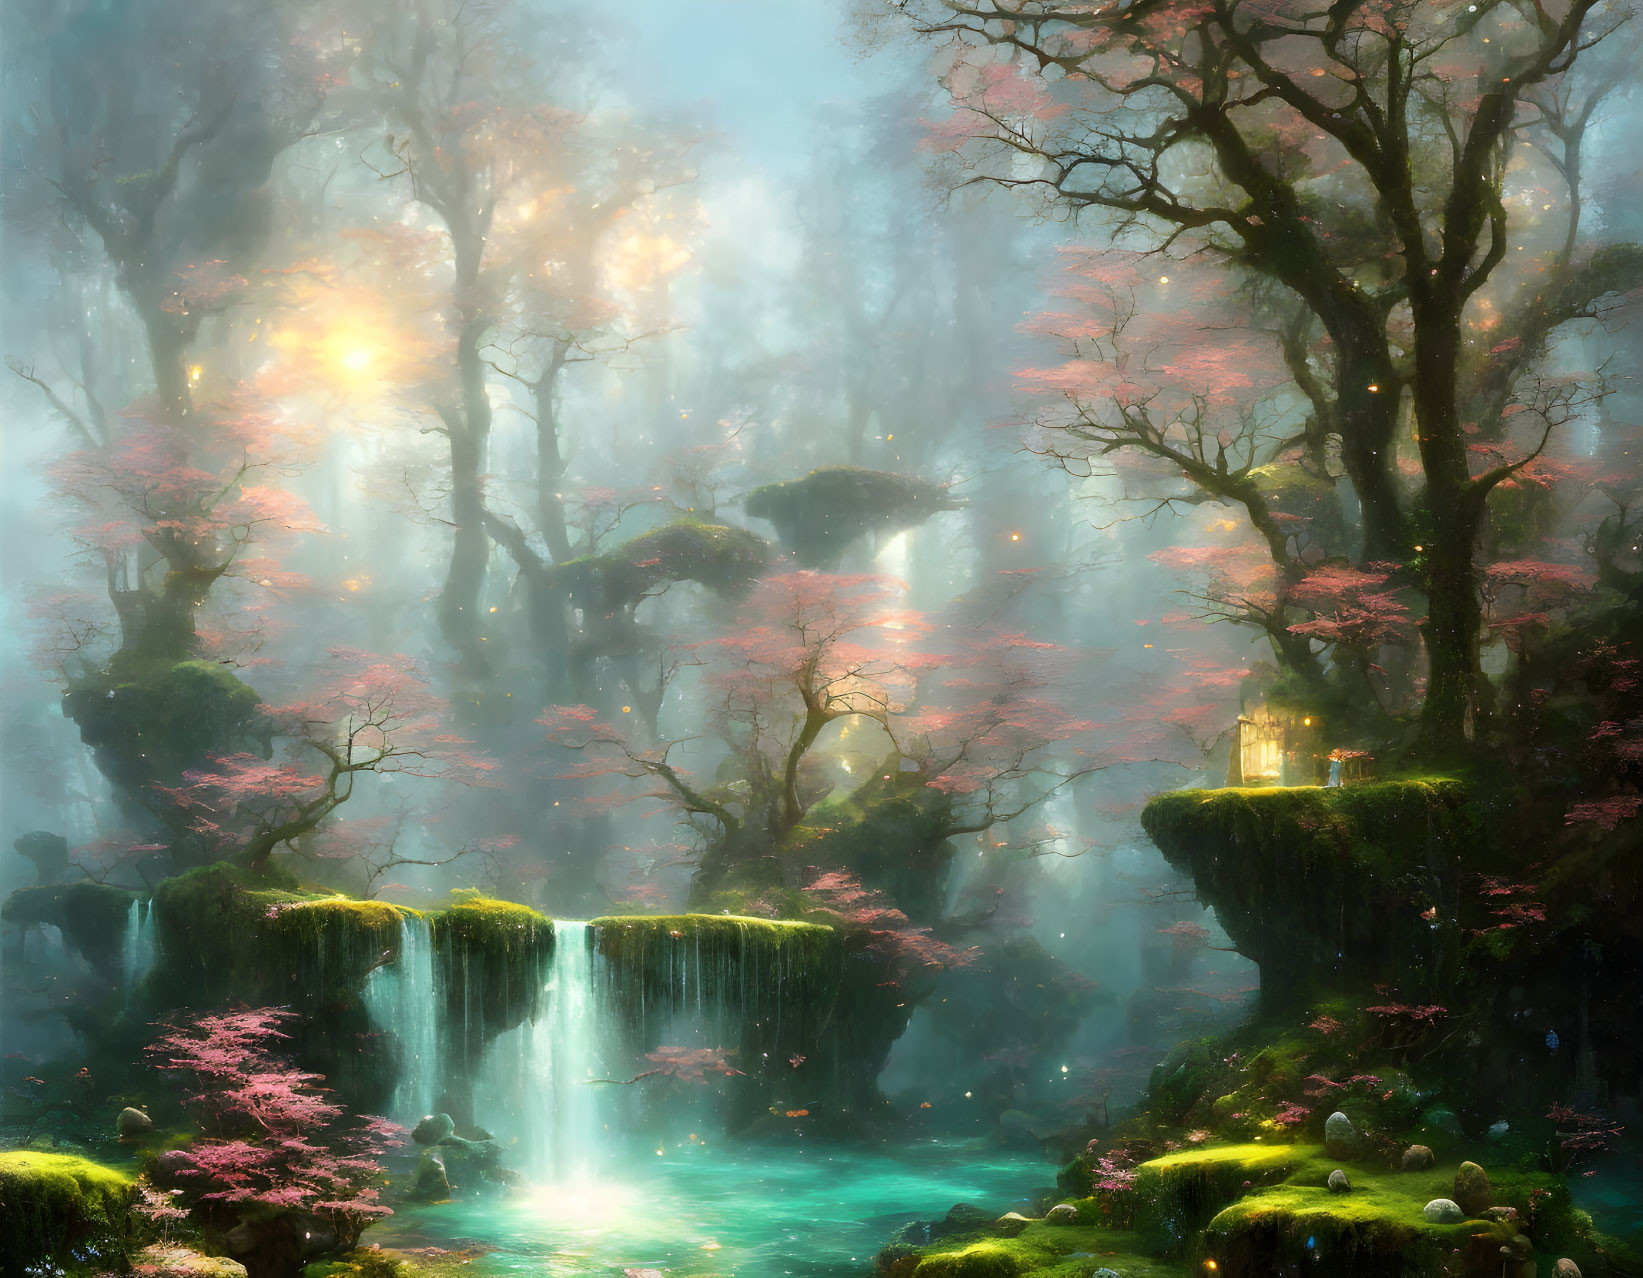 Tranquil forest scene with waterfalls, cherry blossoms, lanterns, and misty atmosphere